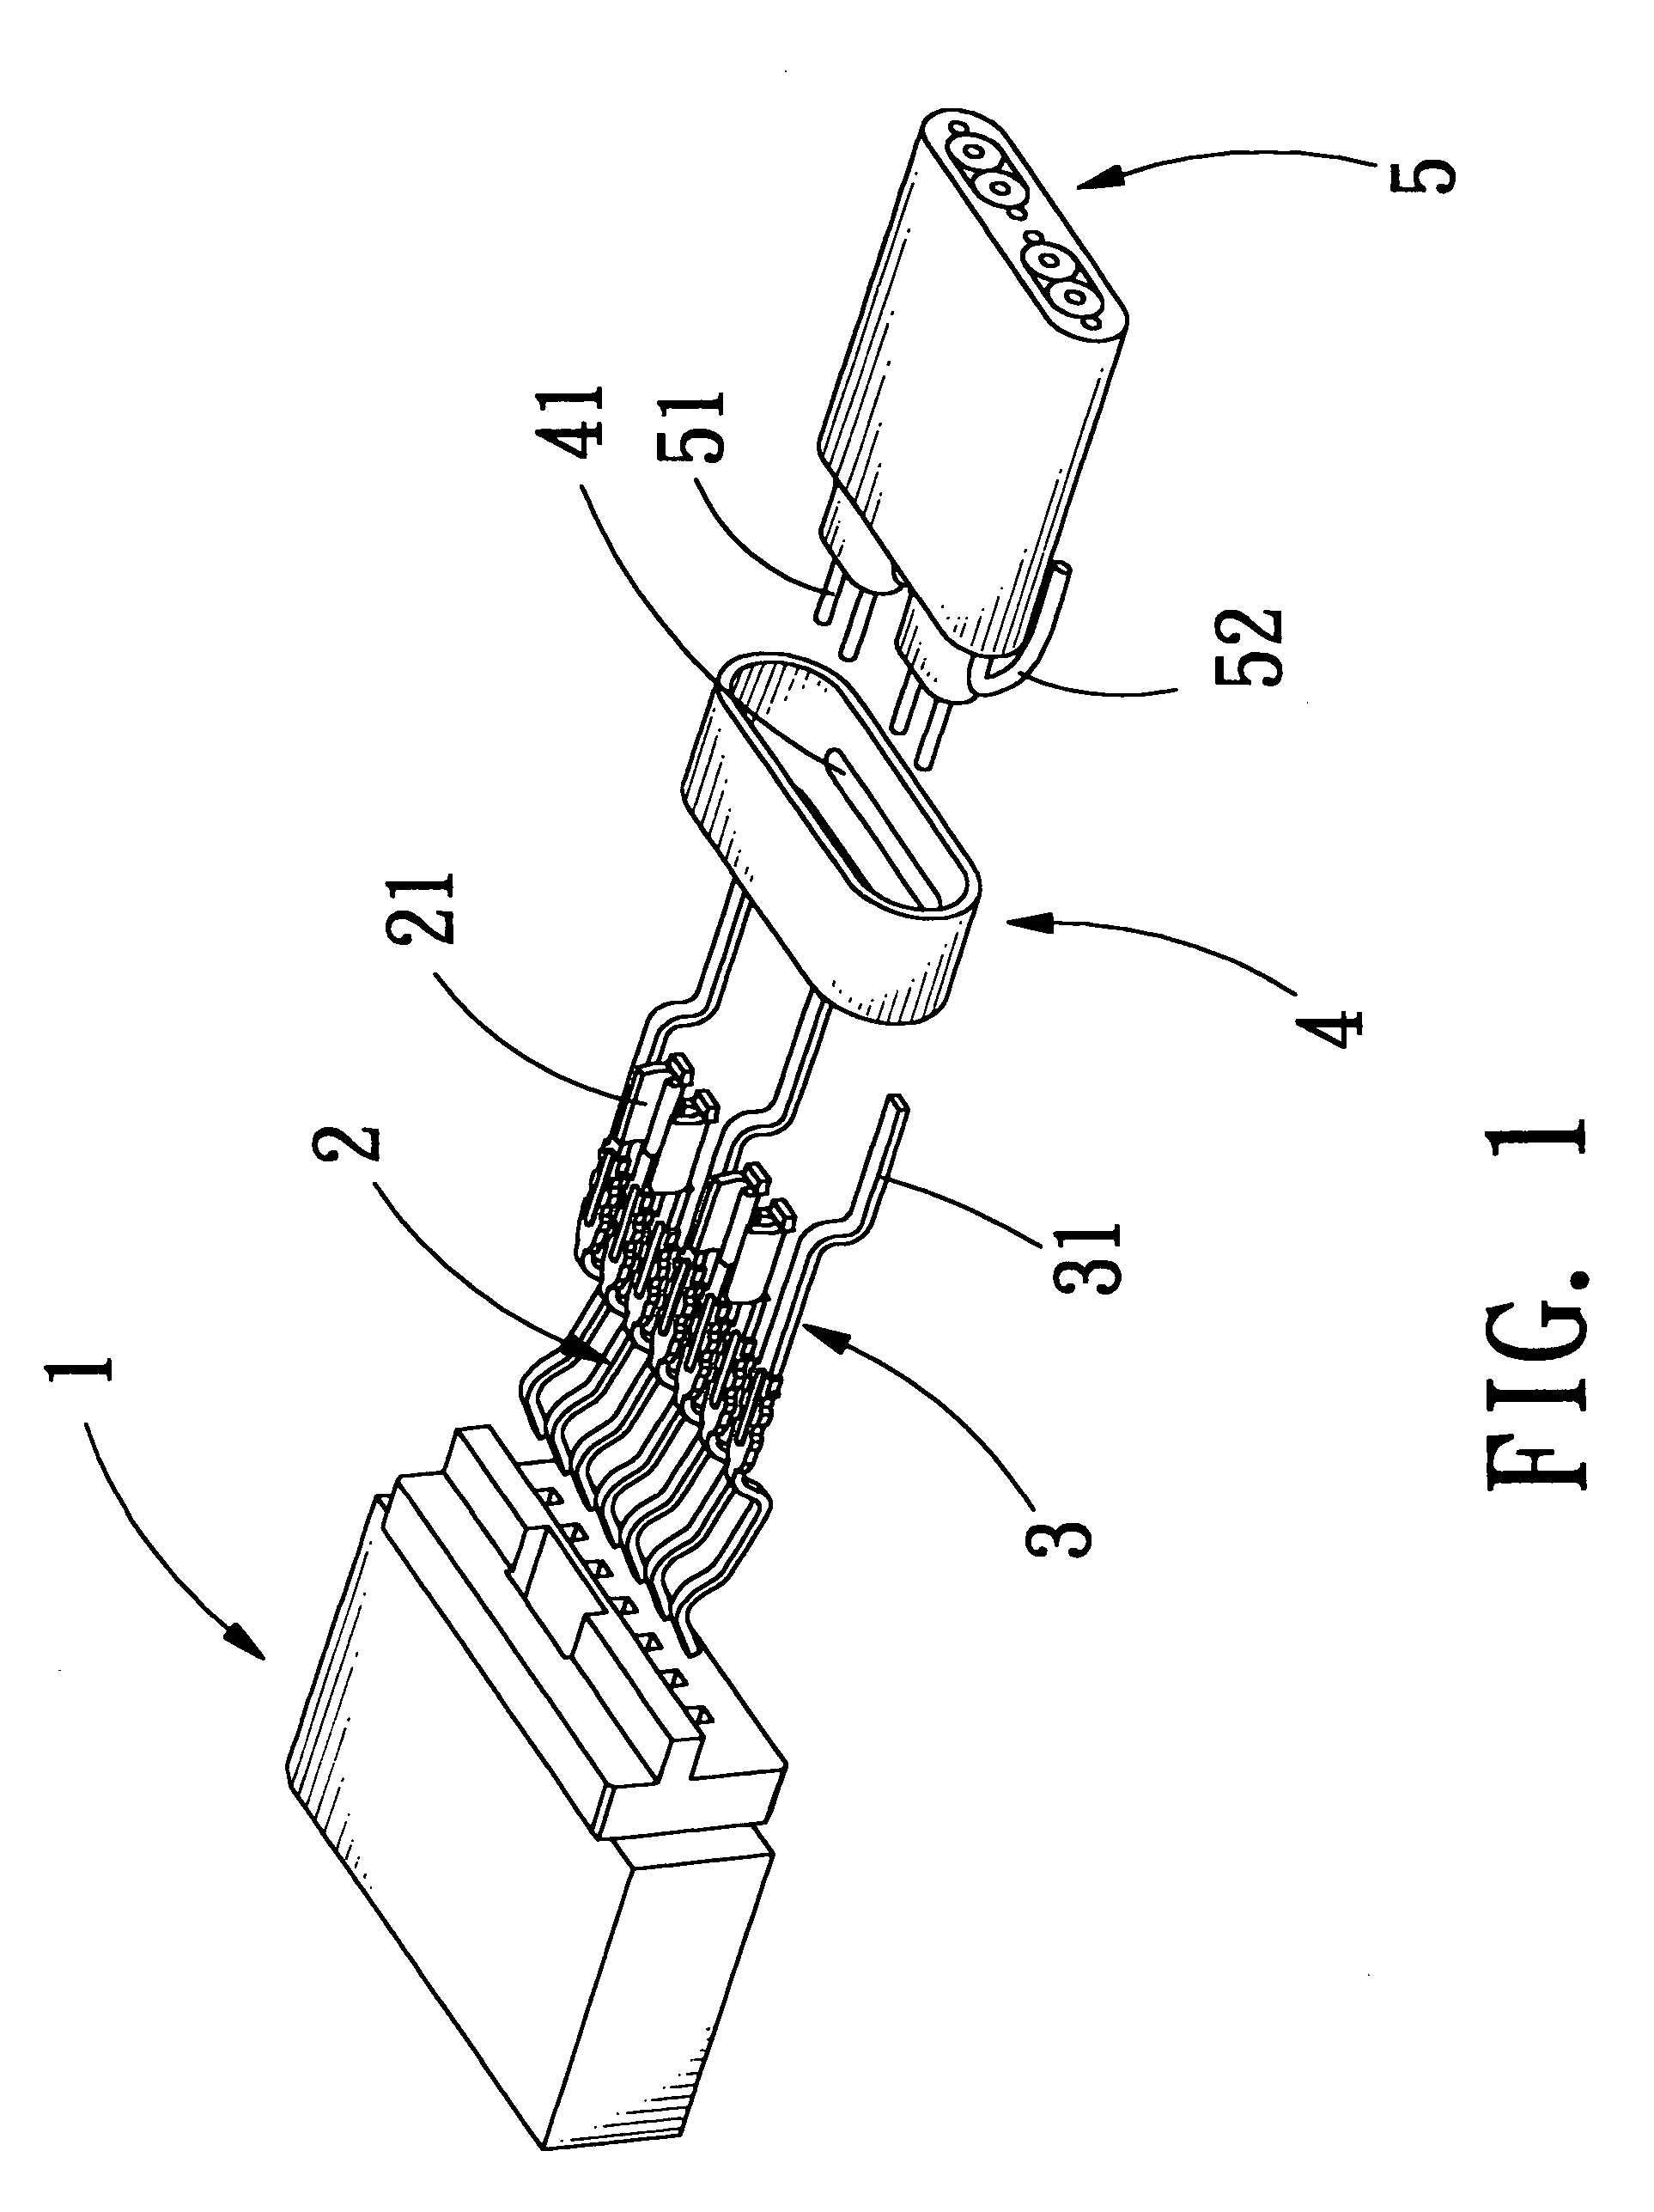 Grounding structure of an electrical connector